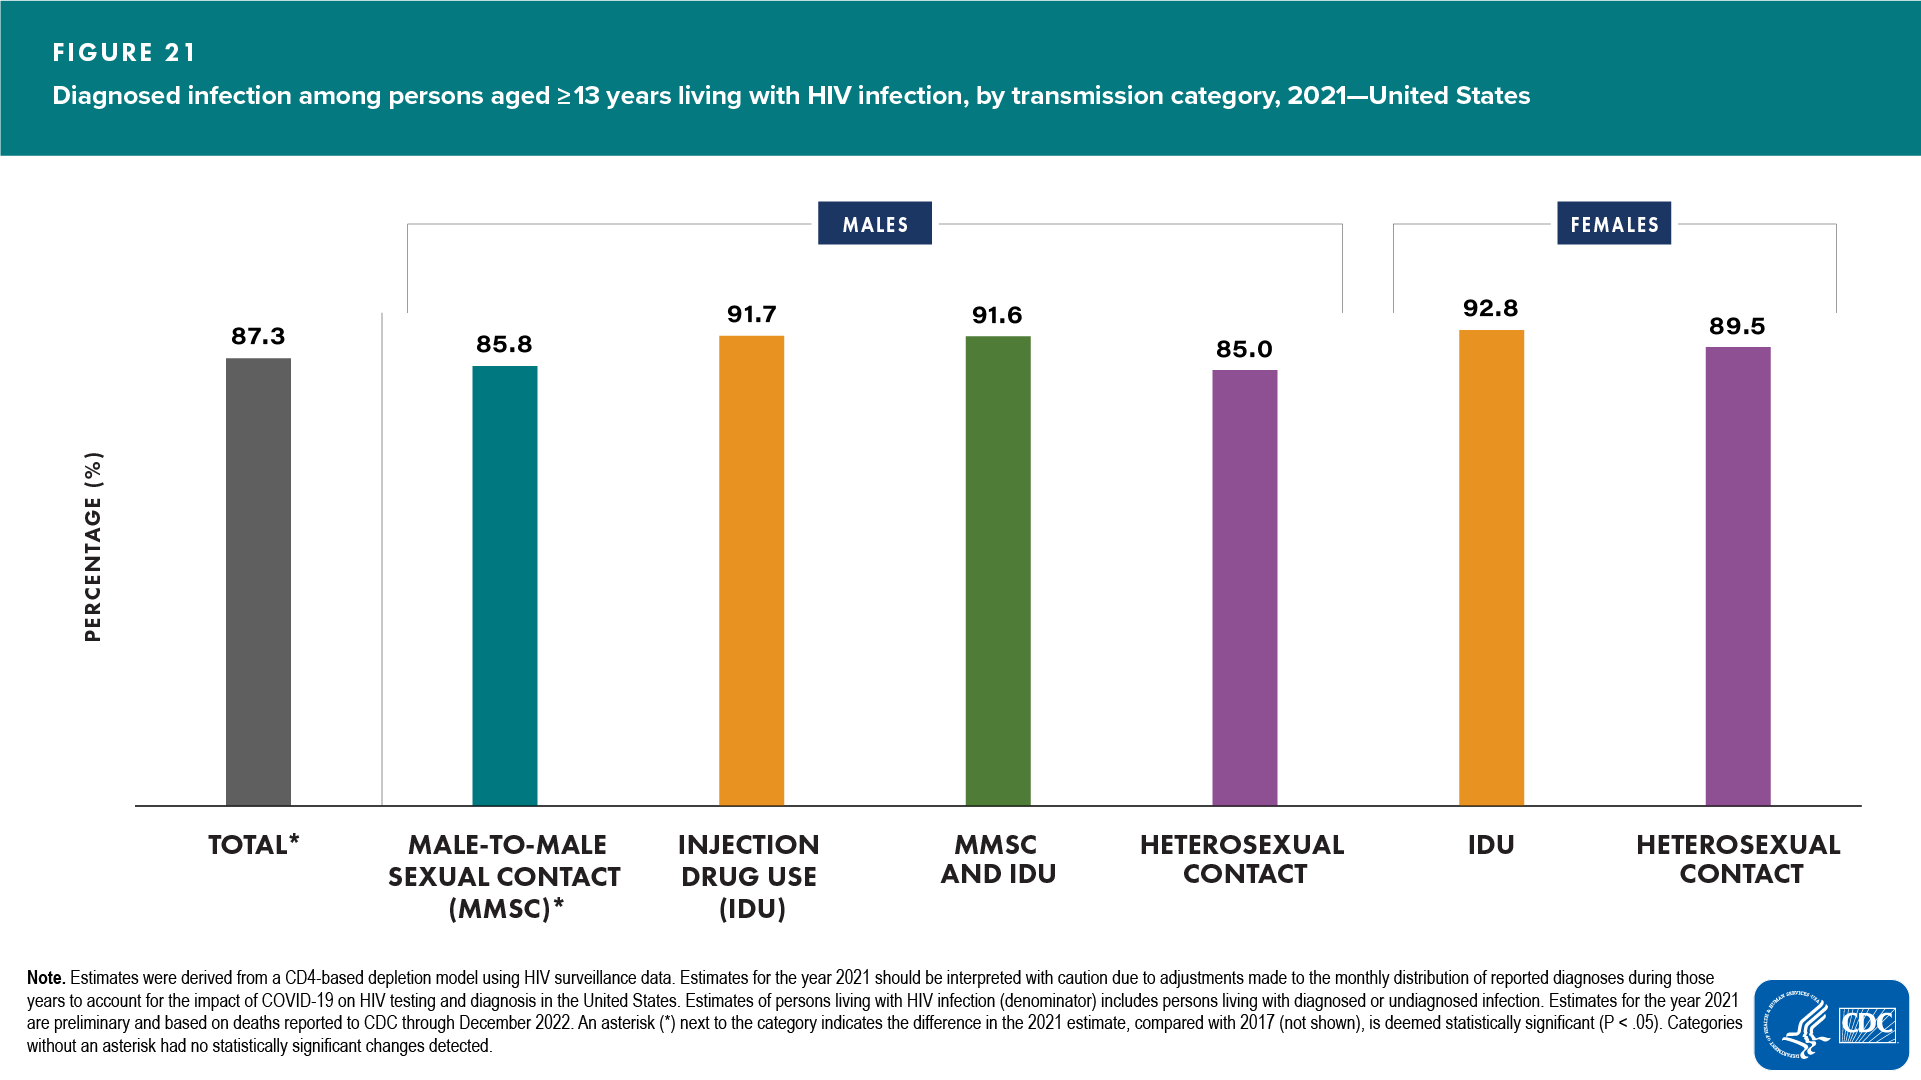 Figure 21. Diagnosed infection among persons aged ≥13 years living with HIV infection, by transmission category, 2021—United States